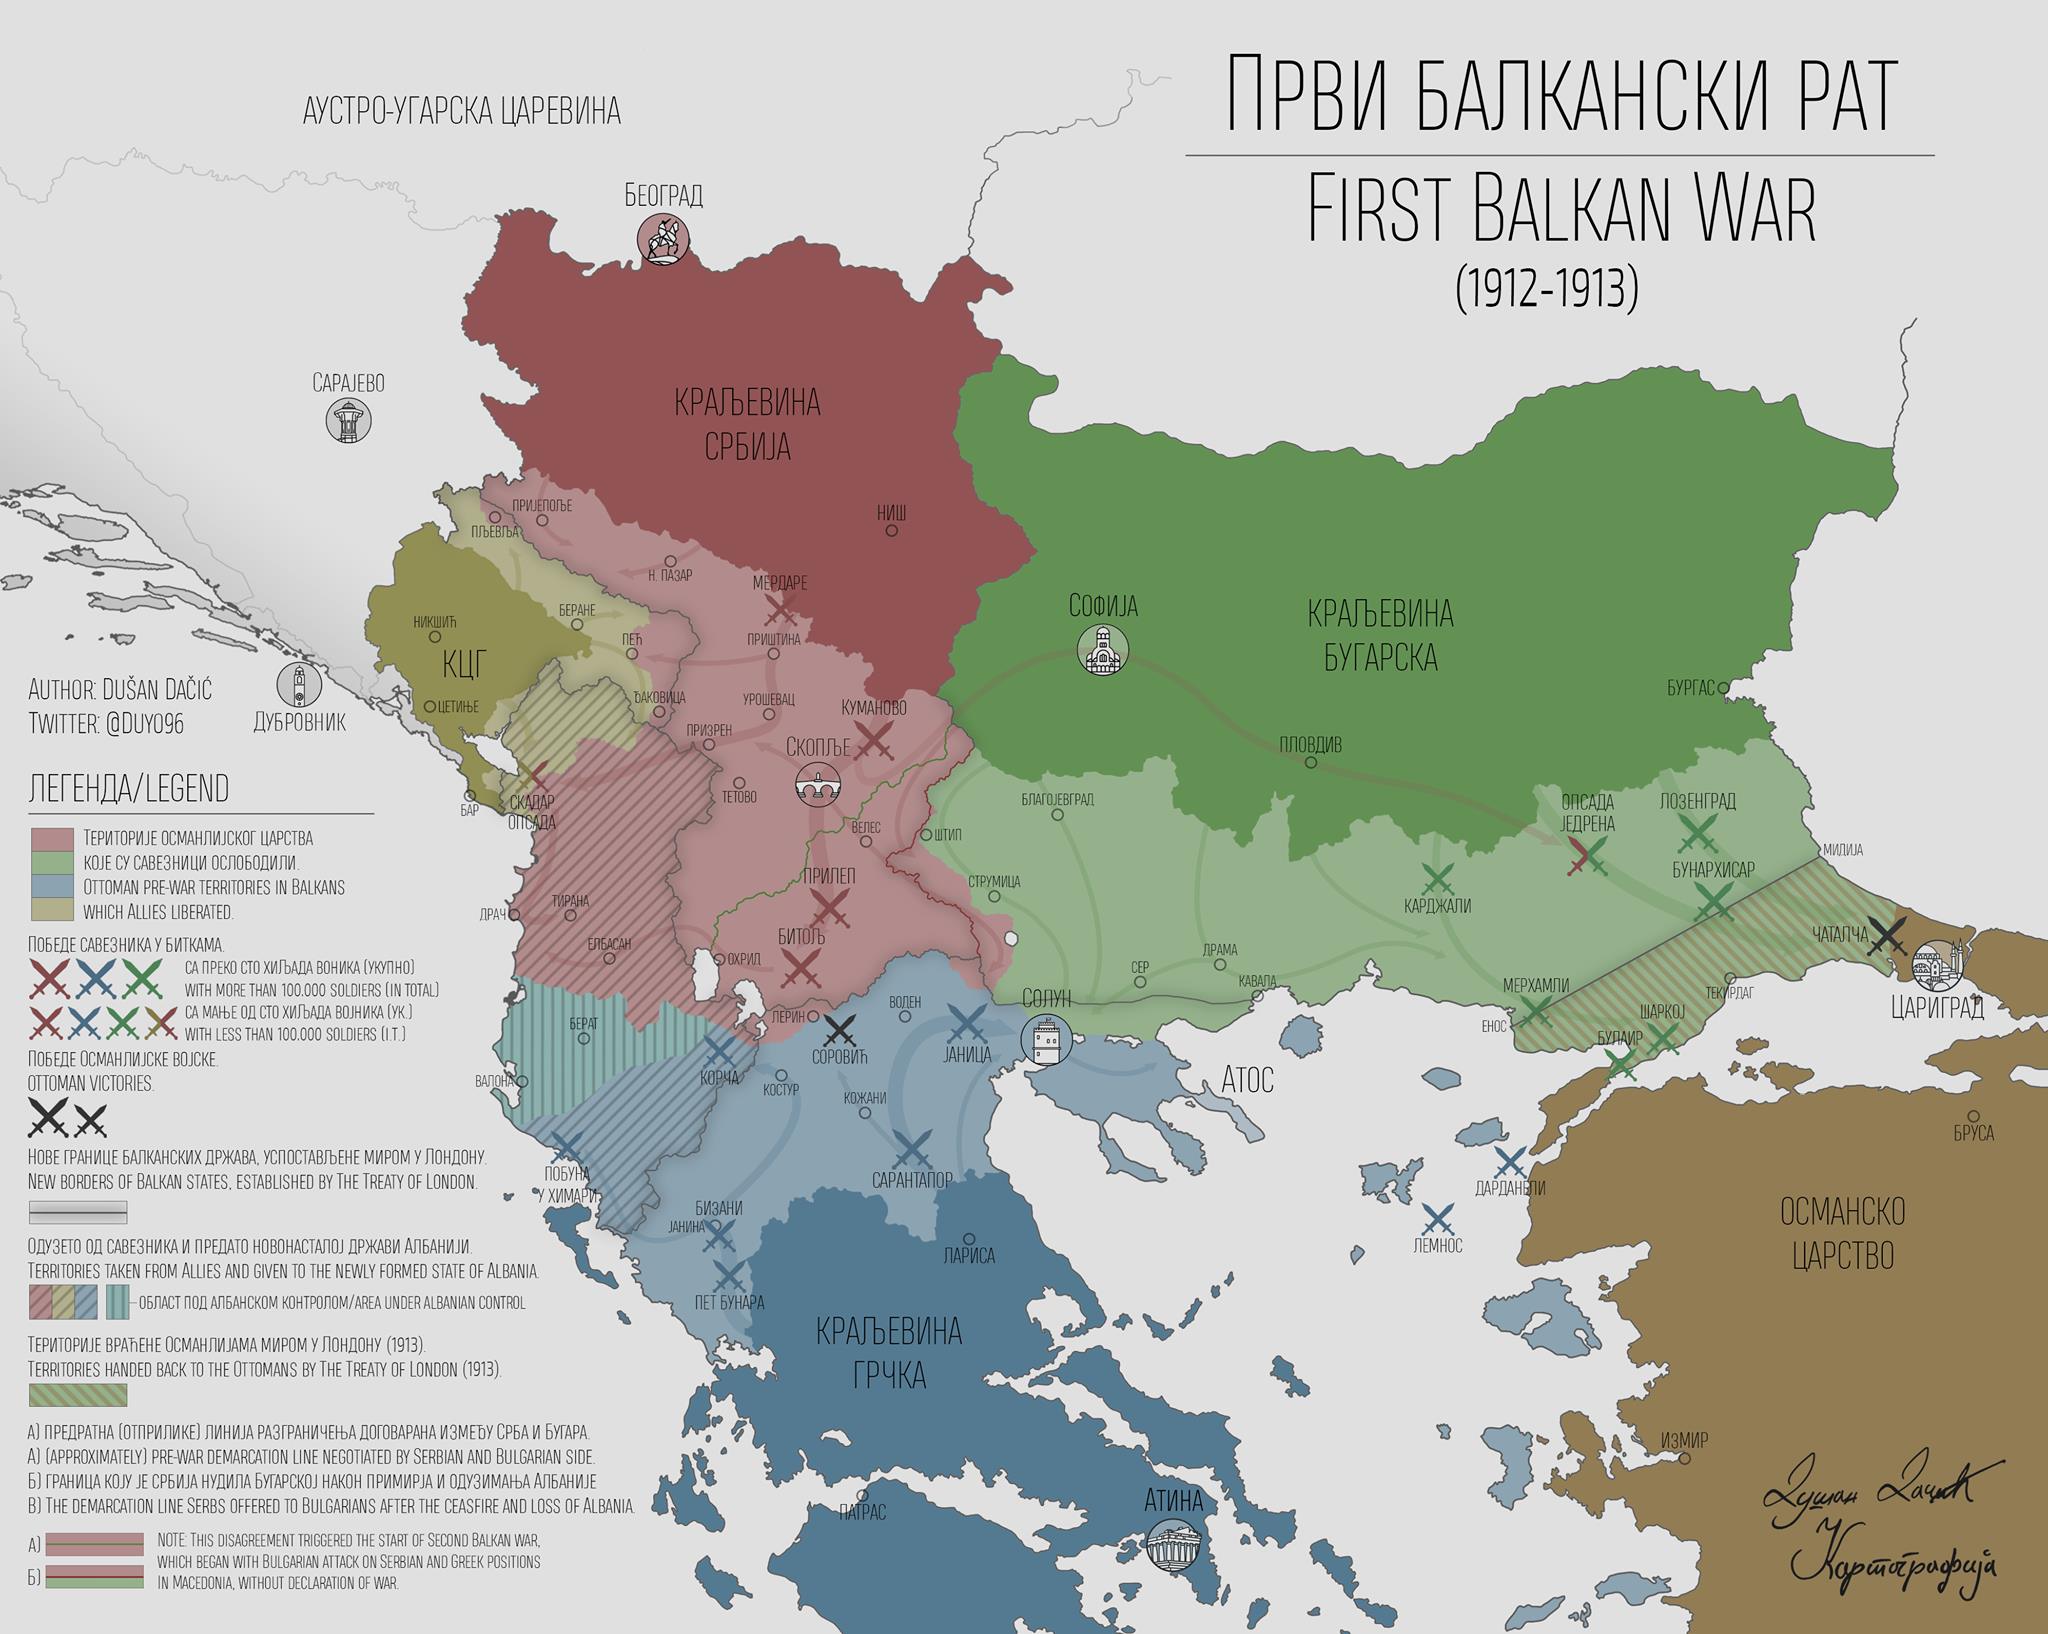 Map of the Balkans after the First Balkan War, in Serbian and English.